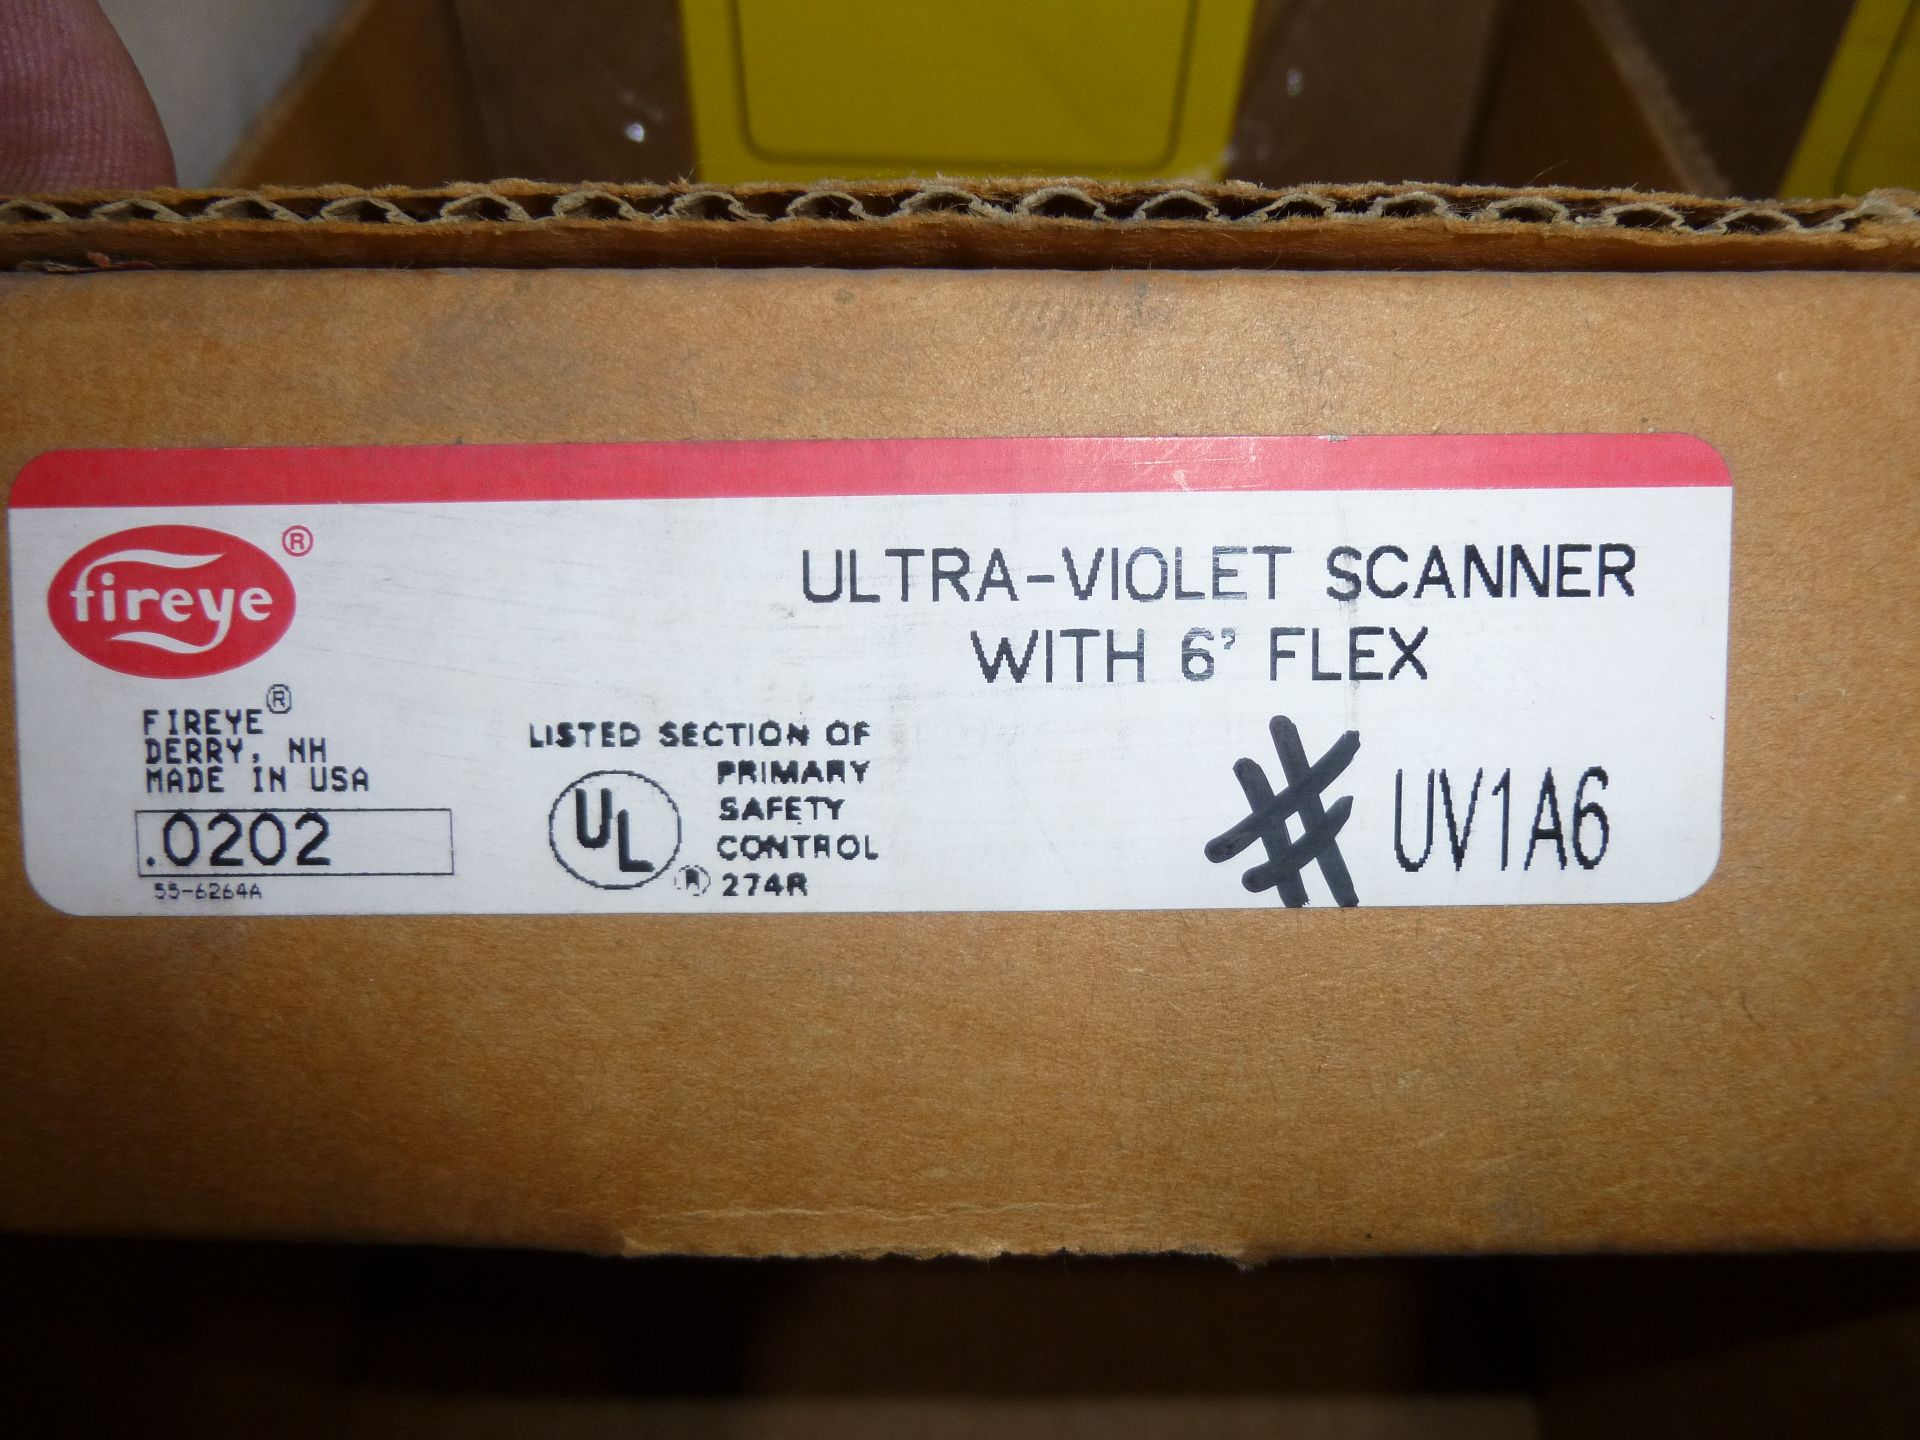 Fireye Ultra-Violet Scanner model UV1A6, new in box, as always with Brolyn LLC auctions, all lots - Image 2 of 2